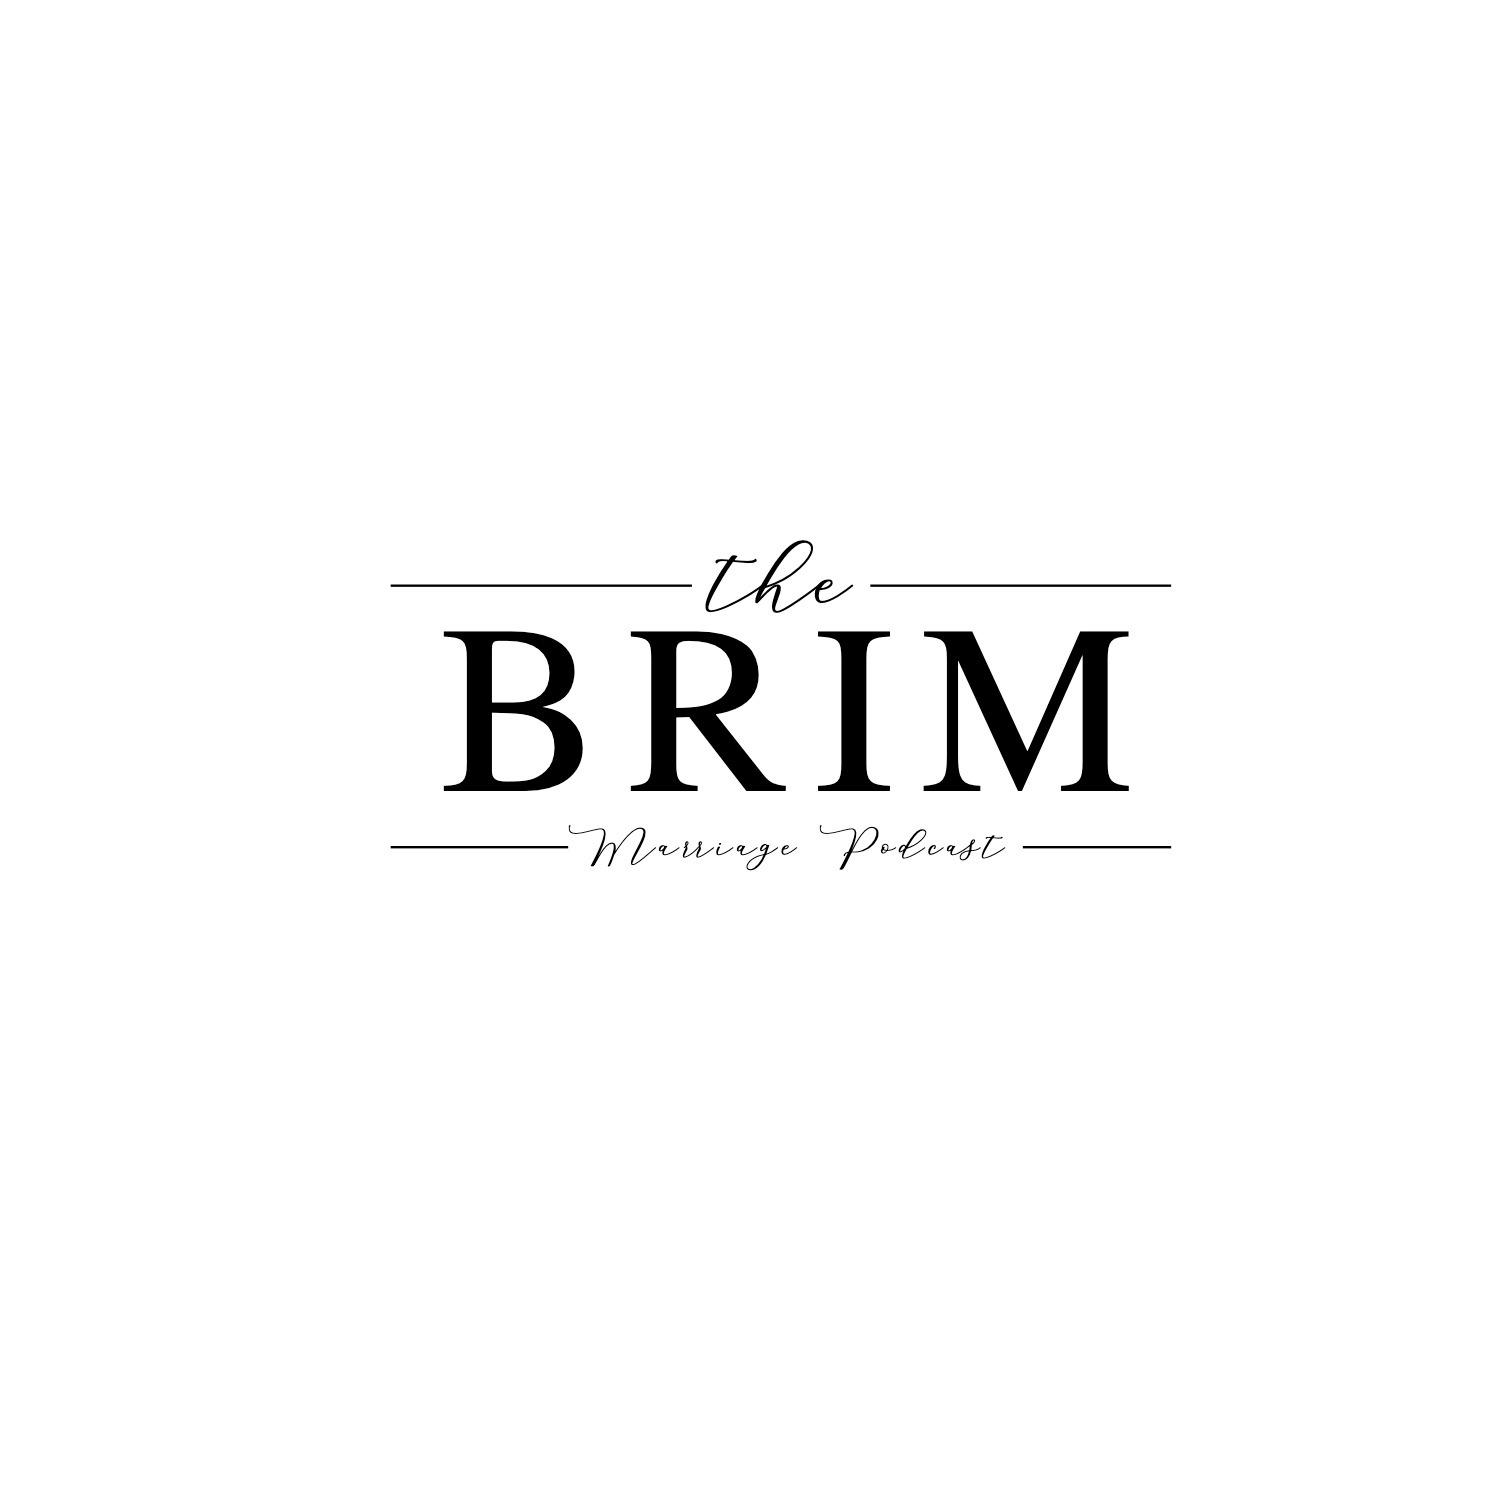 The Brim Marriage Podcast